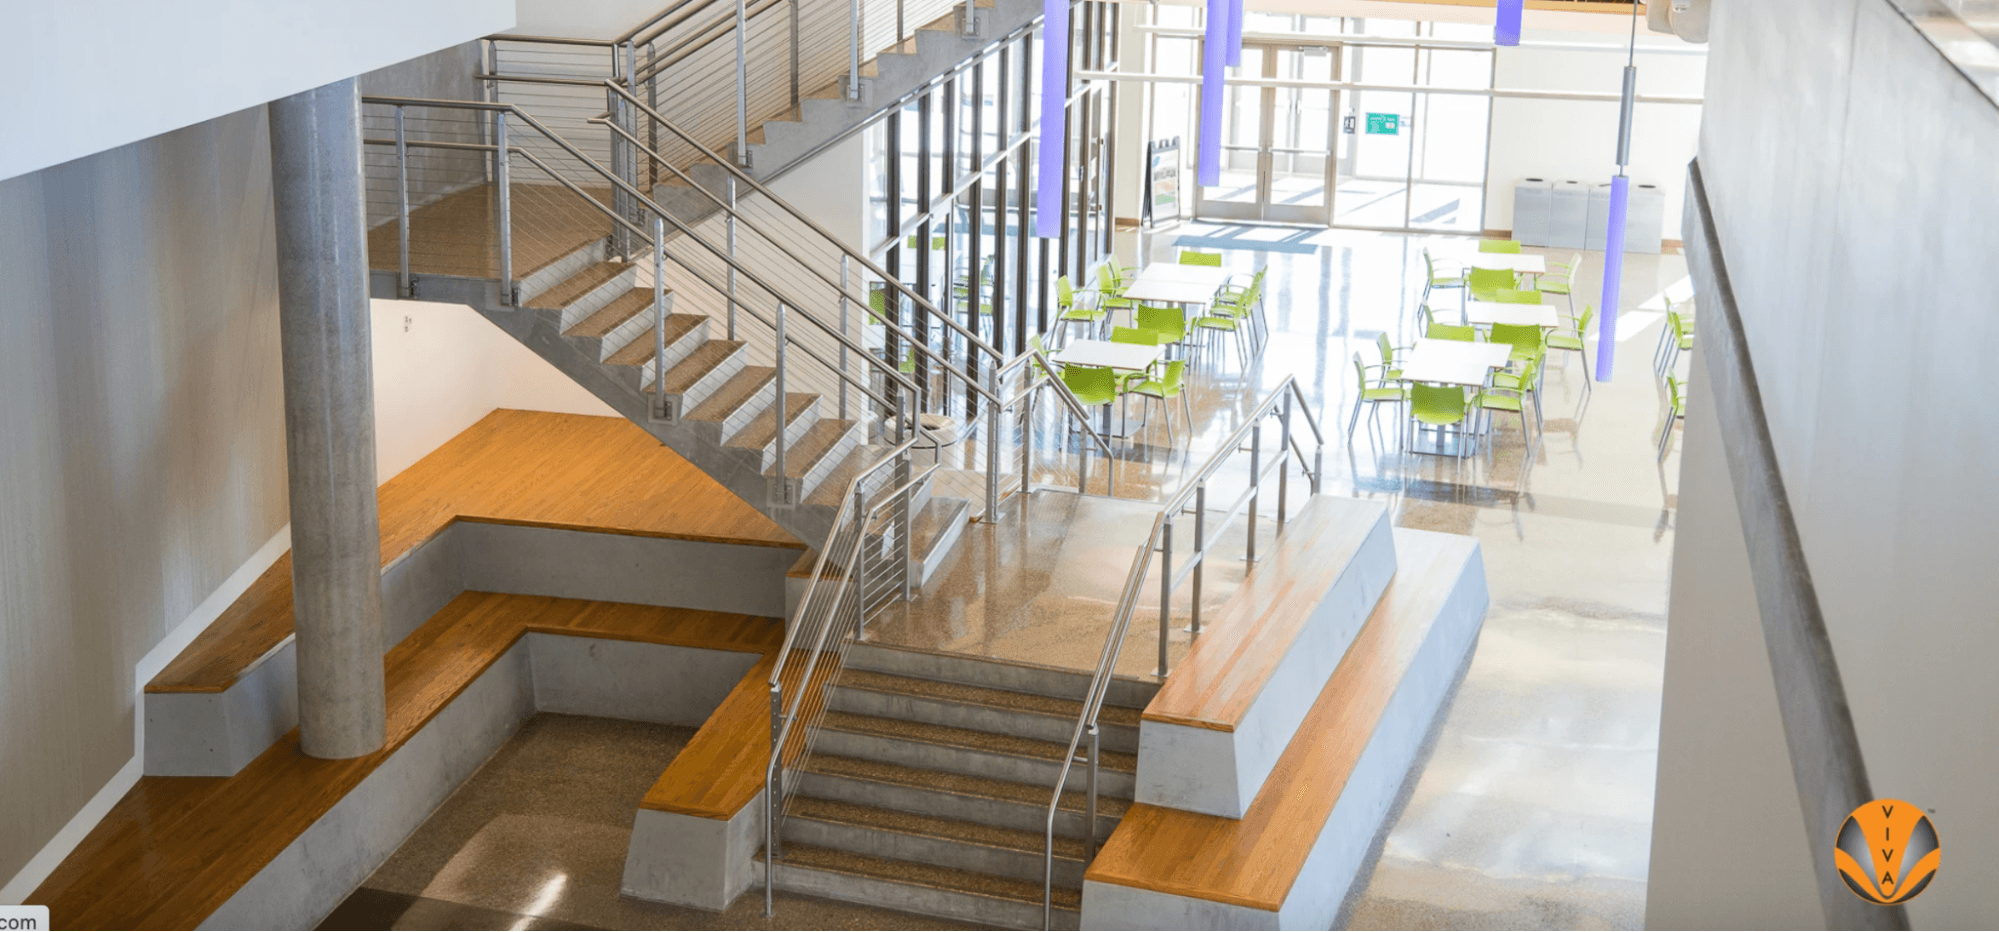 University Railing Solutions: 15 Ideas for Schools & Colleges 2